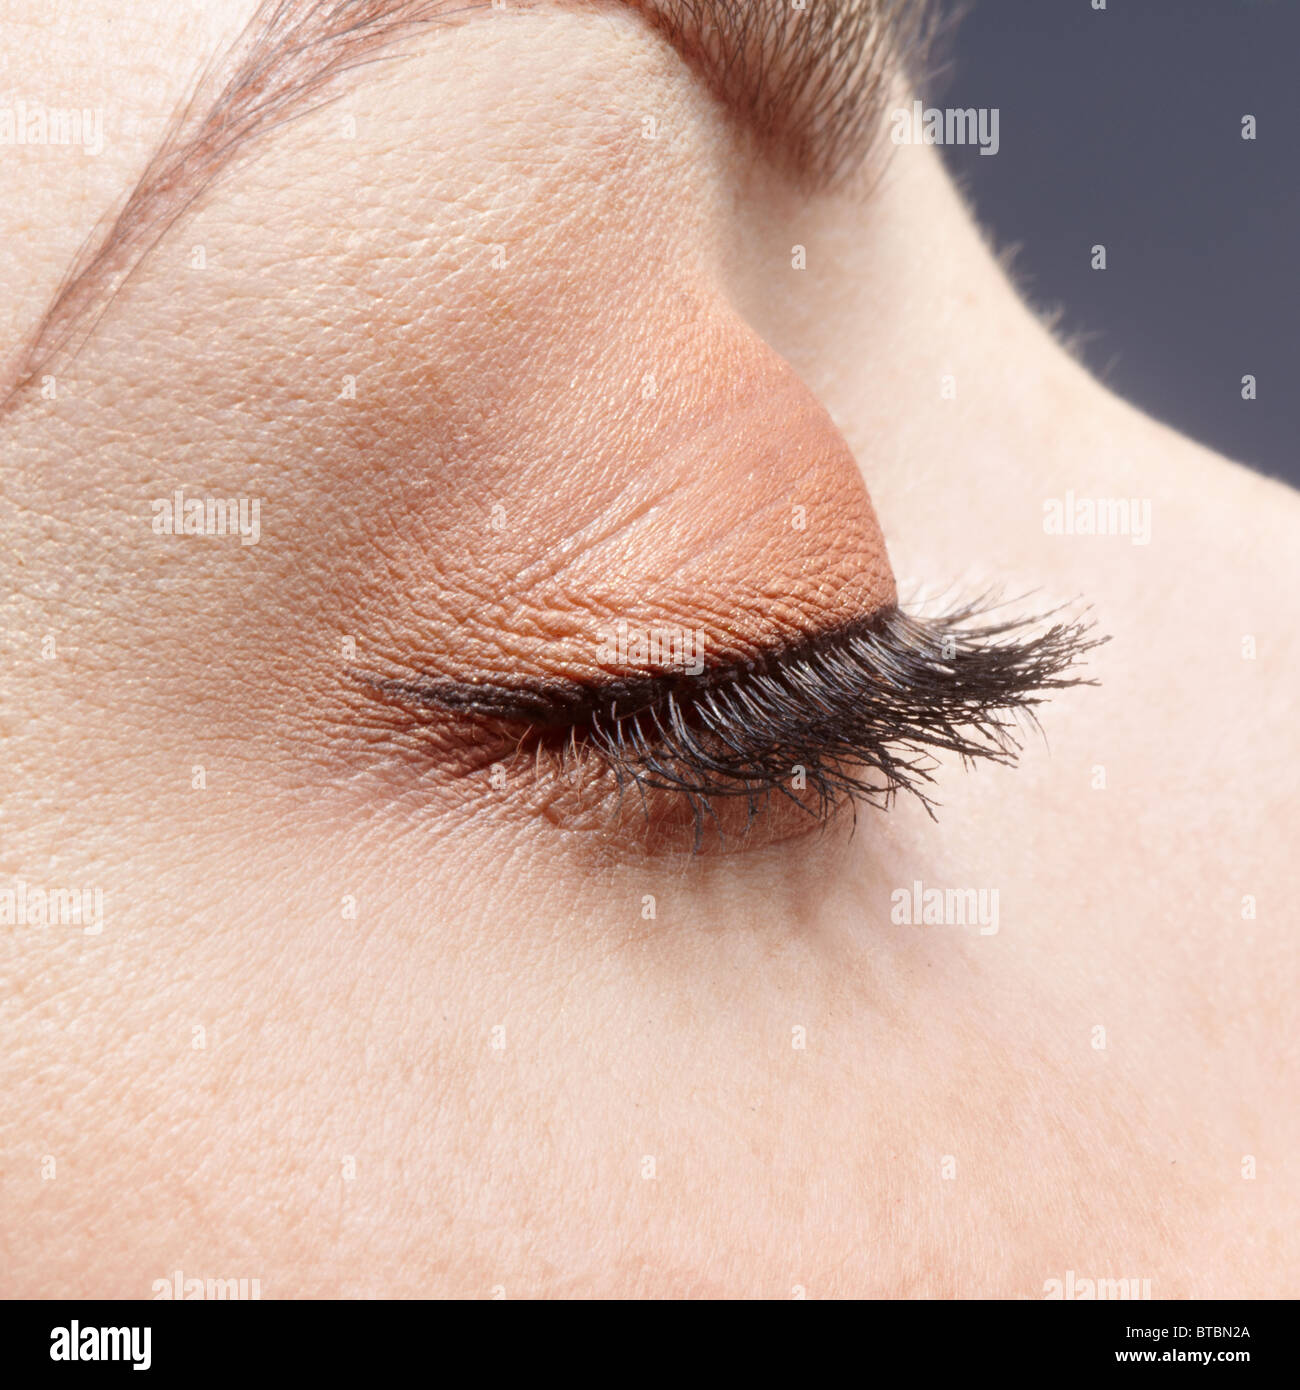 close-up portrait of freckled girl's eye zone Stock Photo